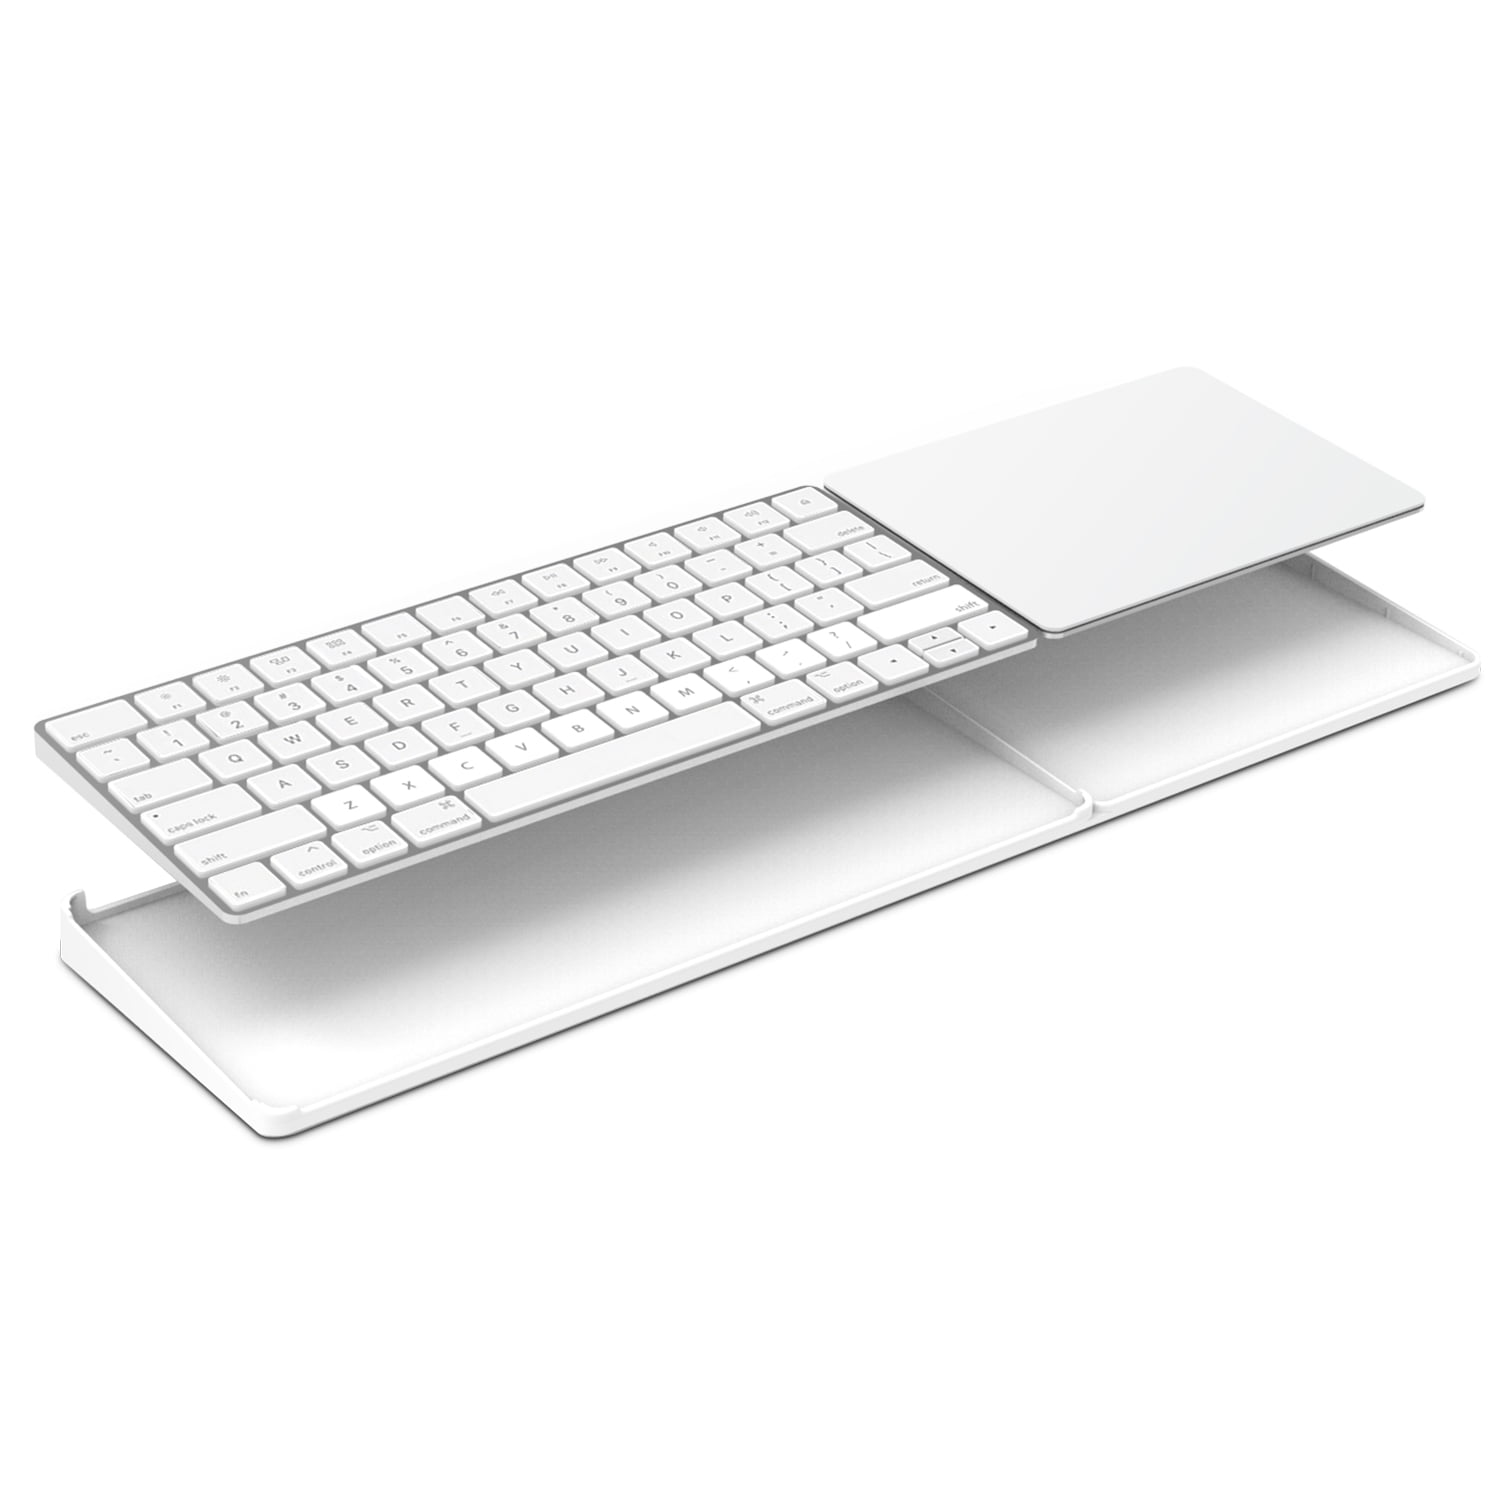 Bestand Stand for Magic Trackpad 2 White Apple Keyboard and Trackpad NOT Included MLA22LL/A MJ2R2LL/A and Apple latest Magic Keyboard